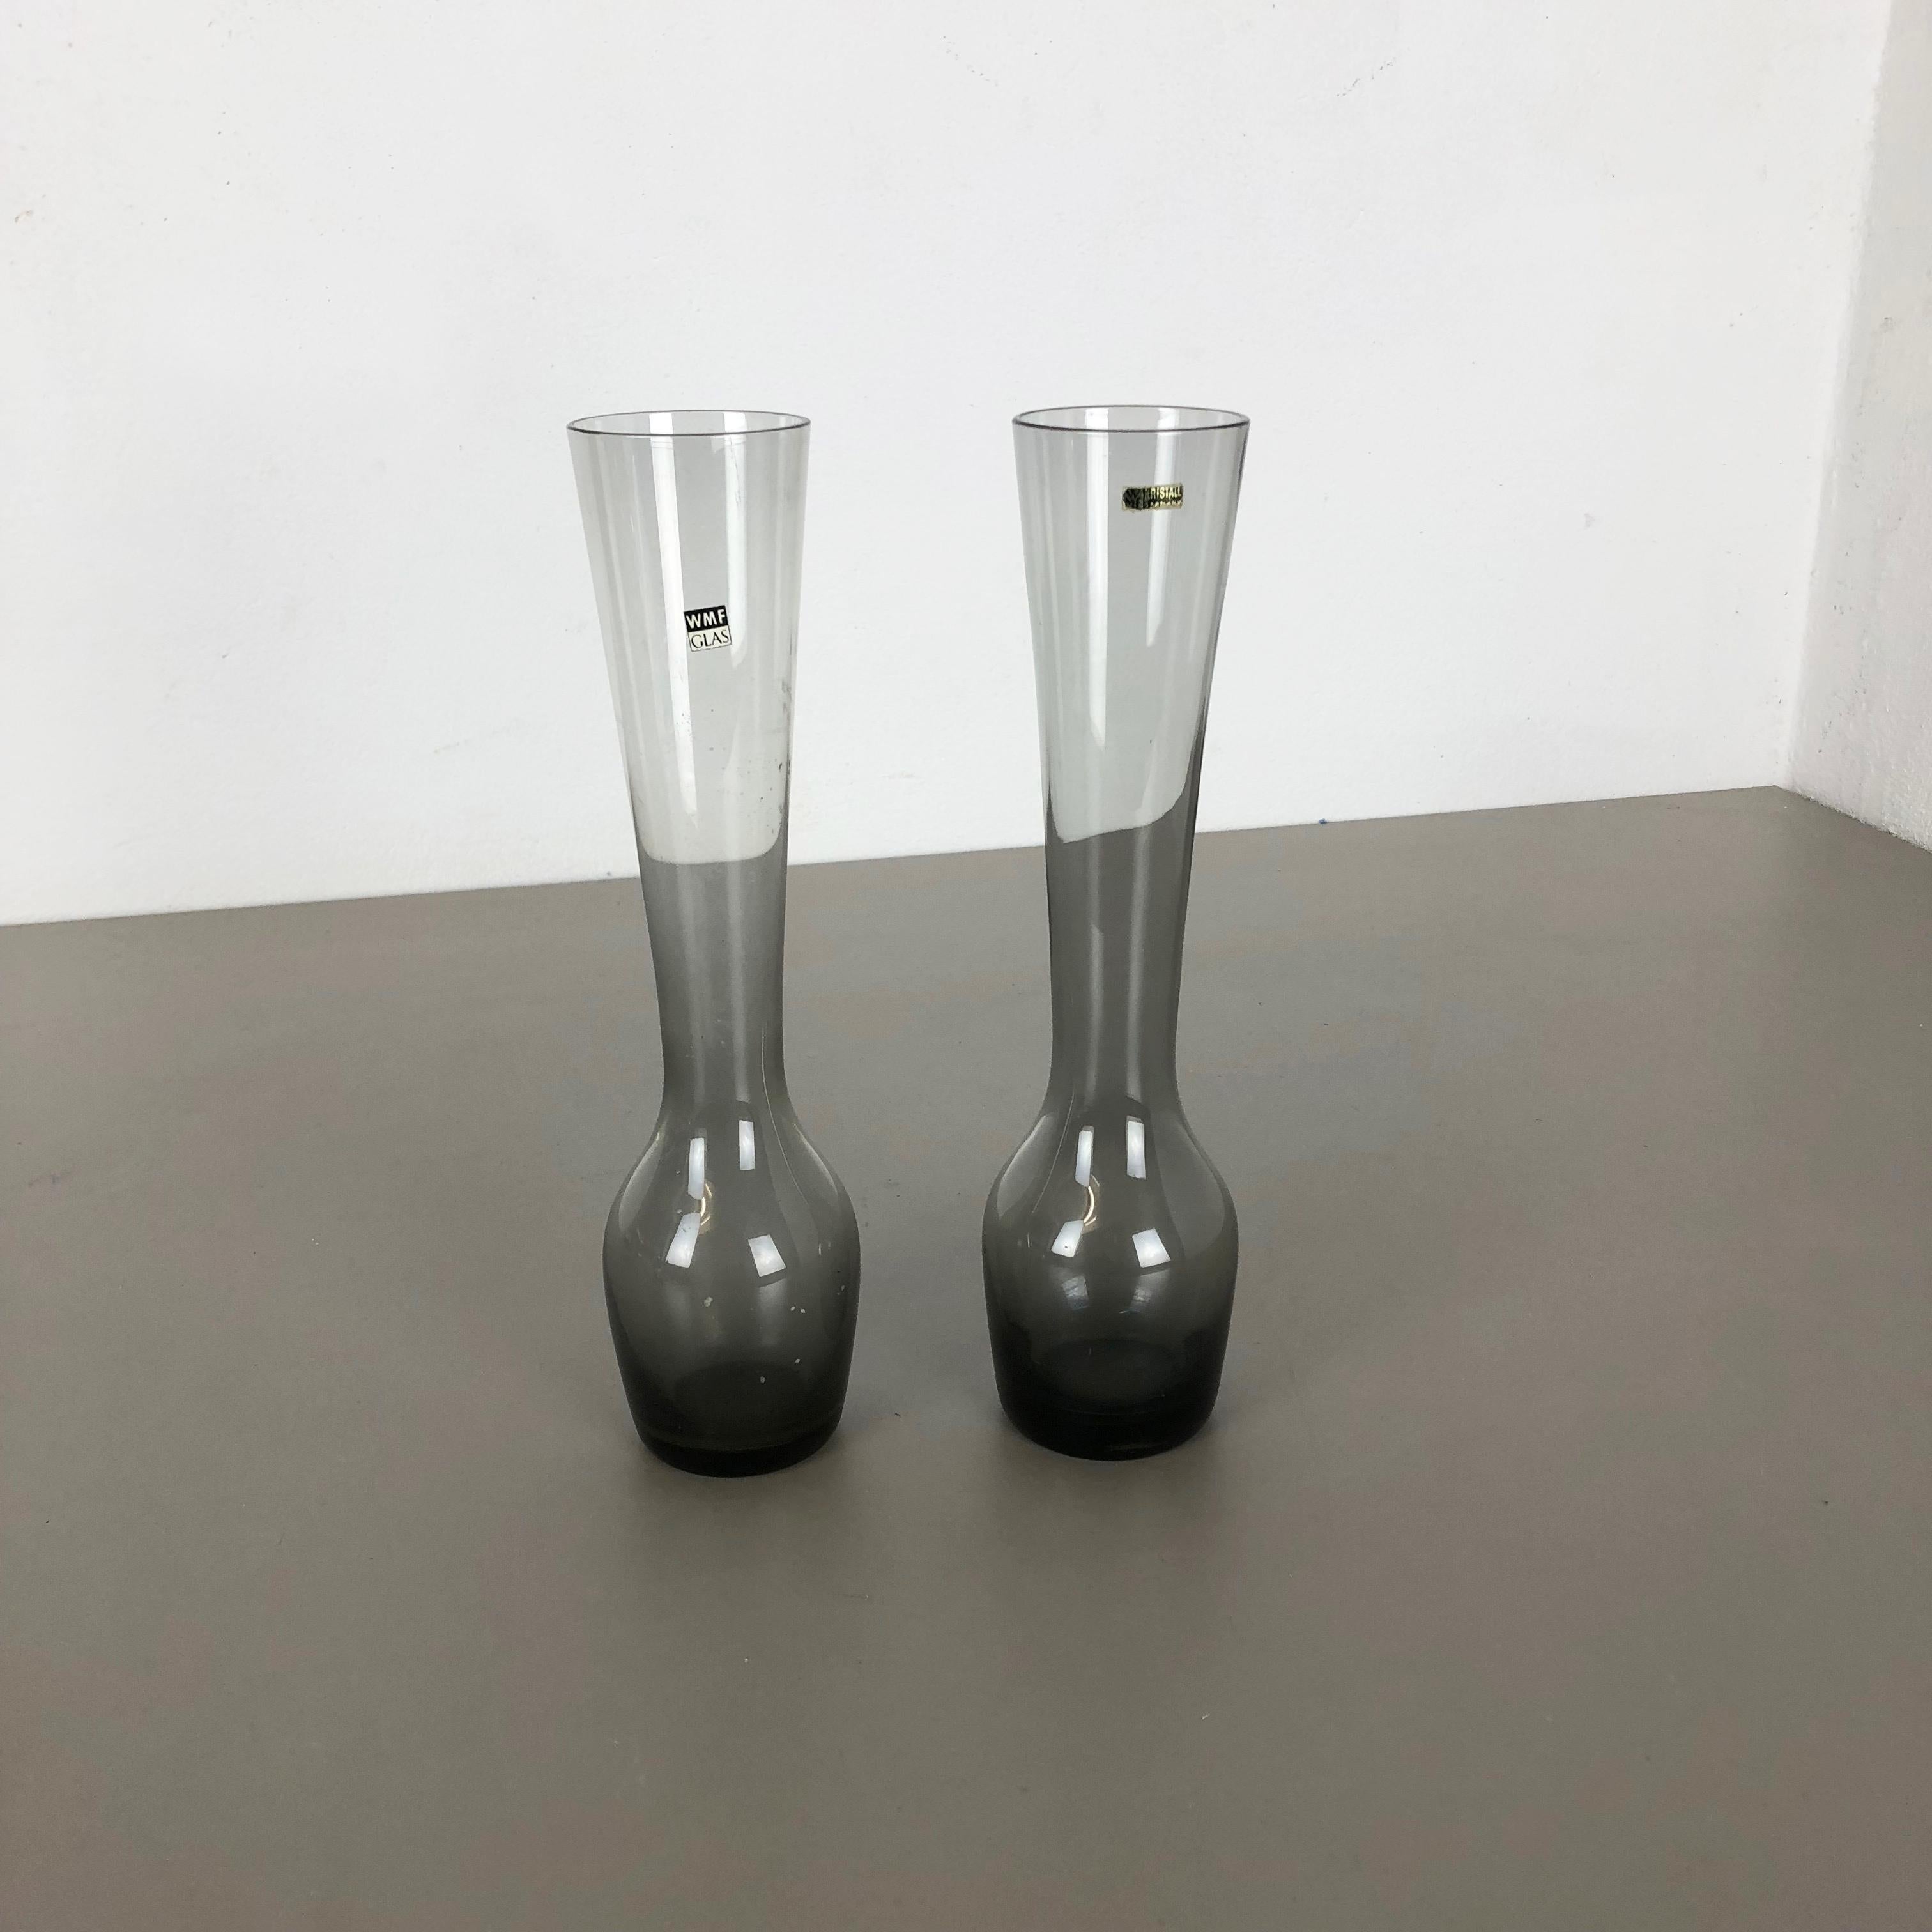 Article:

Set of 2 Turmalin vases


Producer:

WMF, Germany


Design:

Prof. Wilhelm Wagenfeld Bauhaus 



Decade:

1960s




Original vintage 1960s set of 2 vases of the Wagenfeld Turmalin series. These two vase are designed